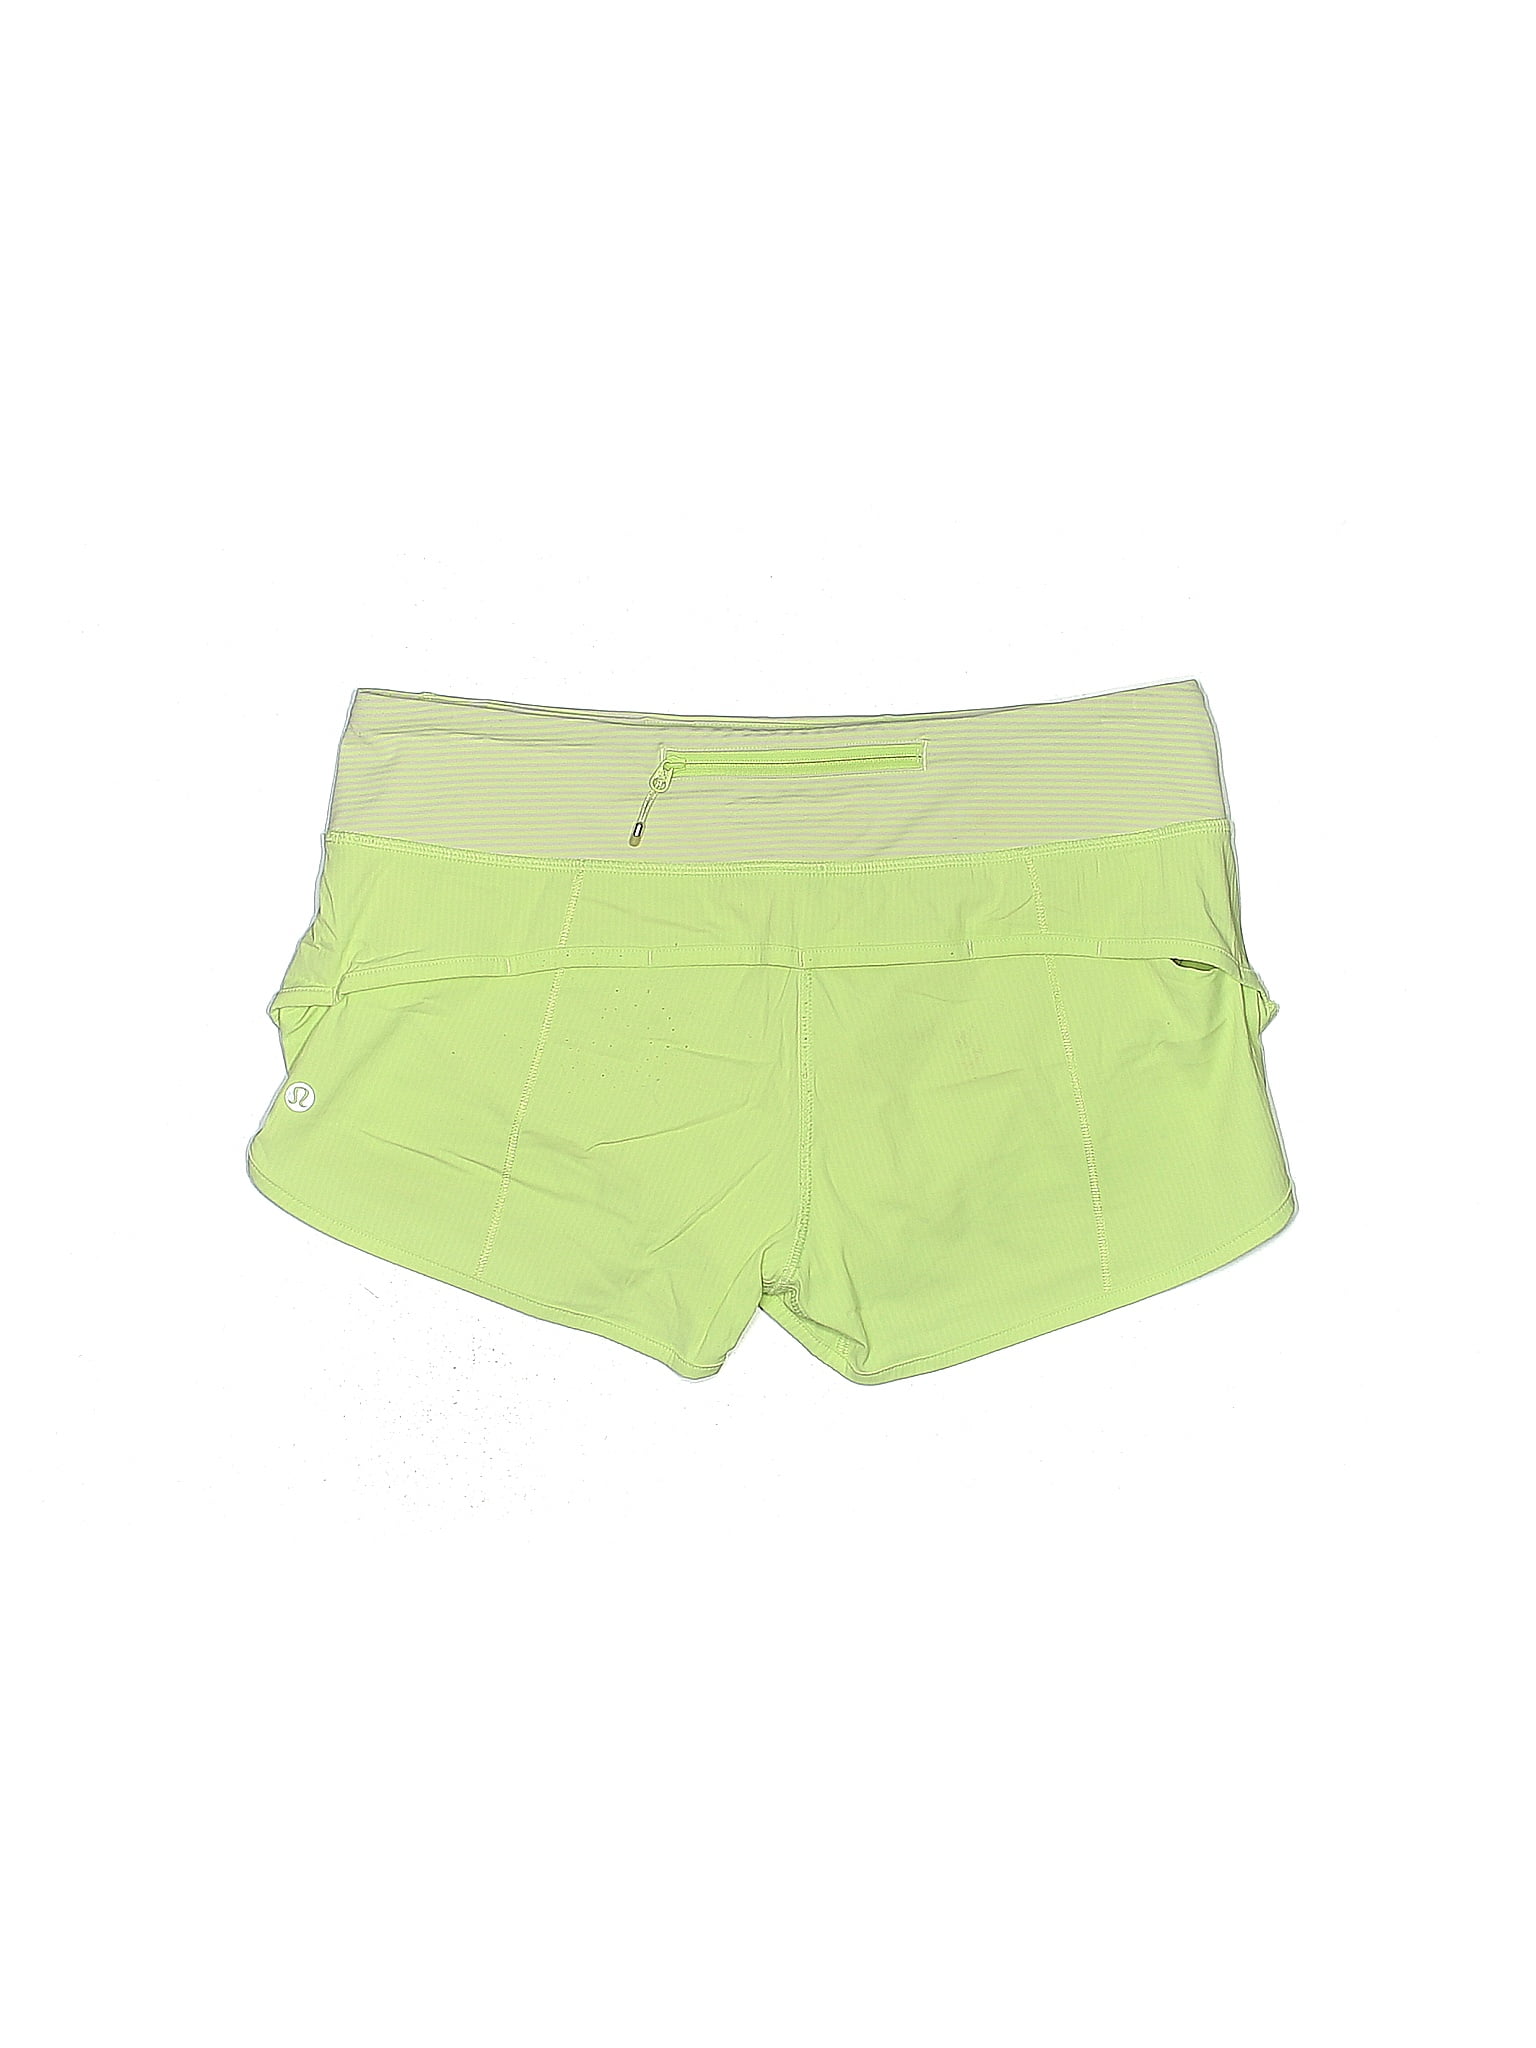 Lululemon Athletica Color Block Solid Green Athletic Shorts Size 8 - 37%  off